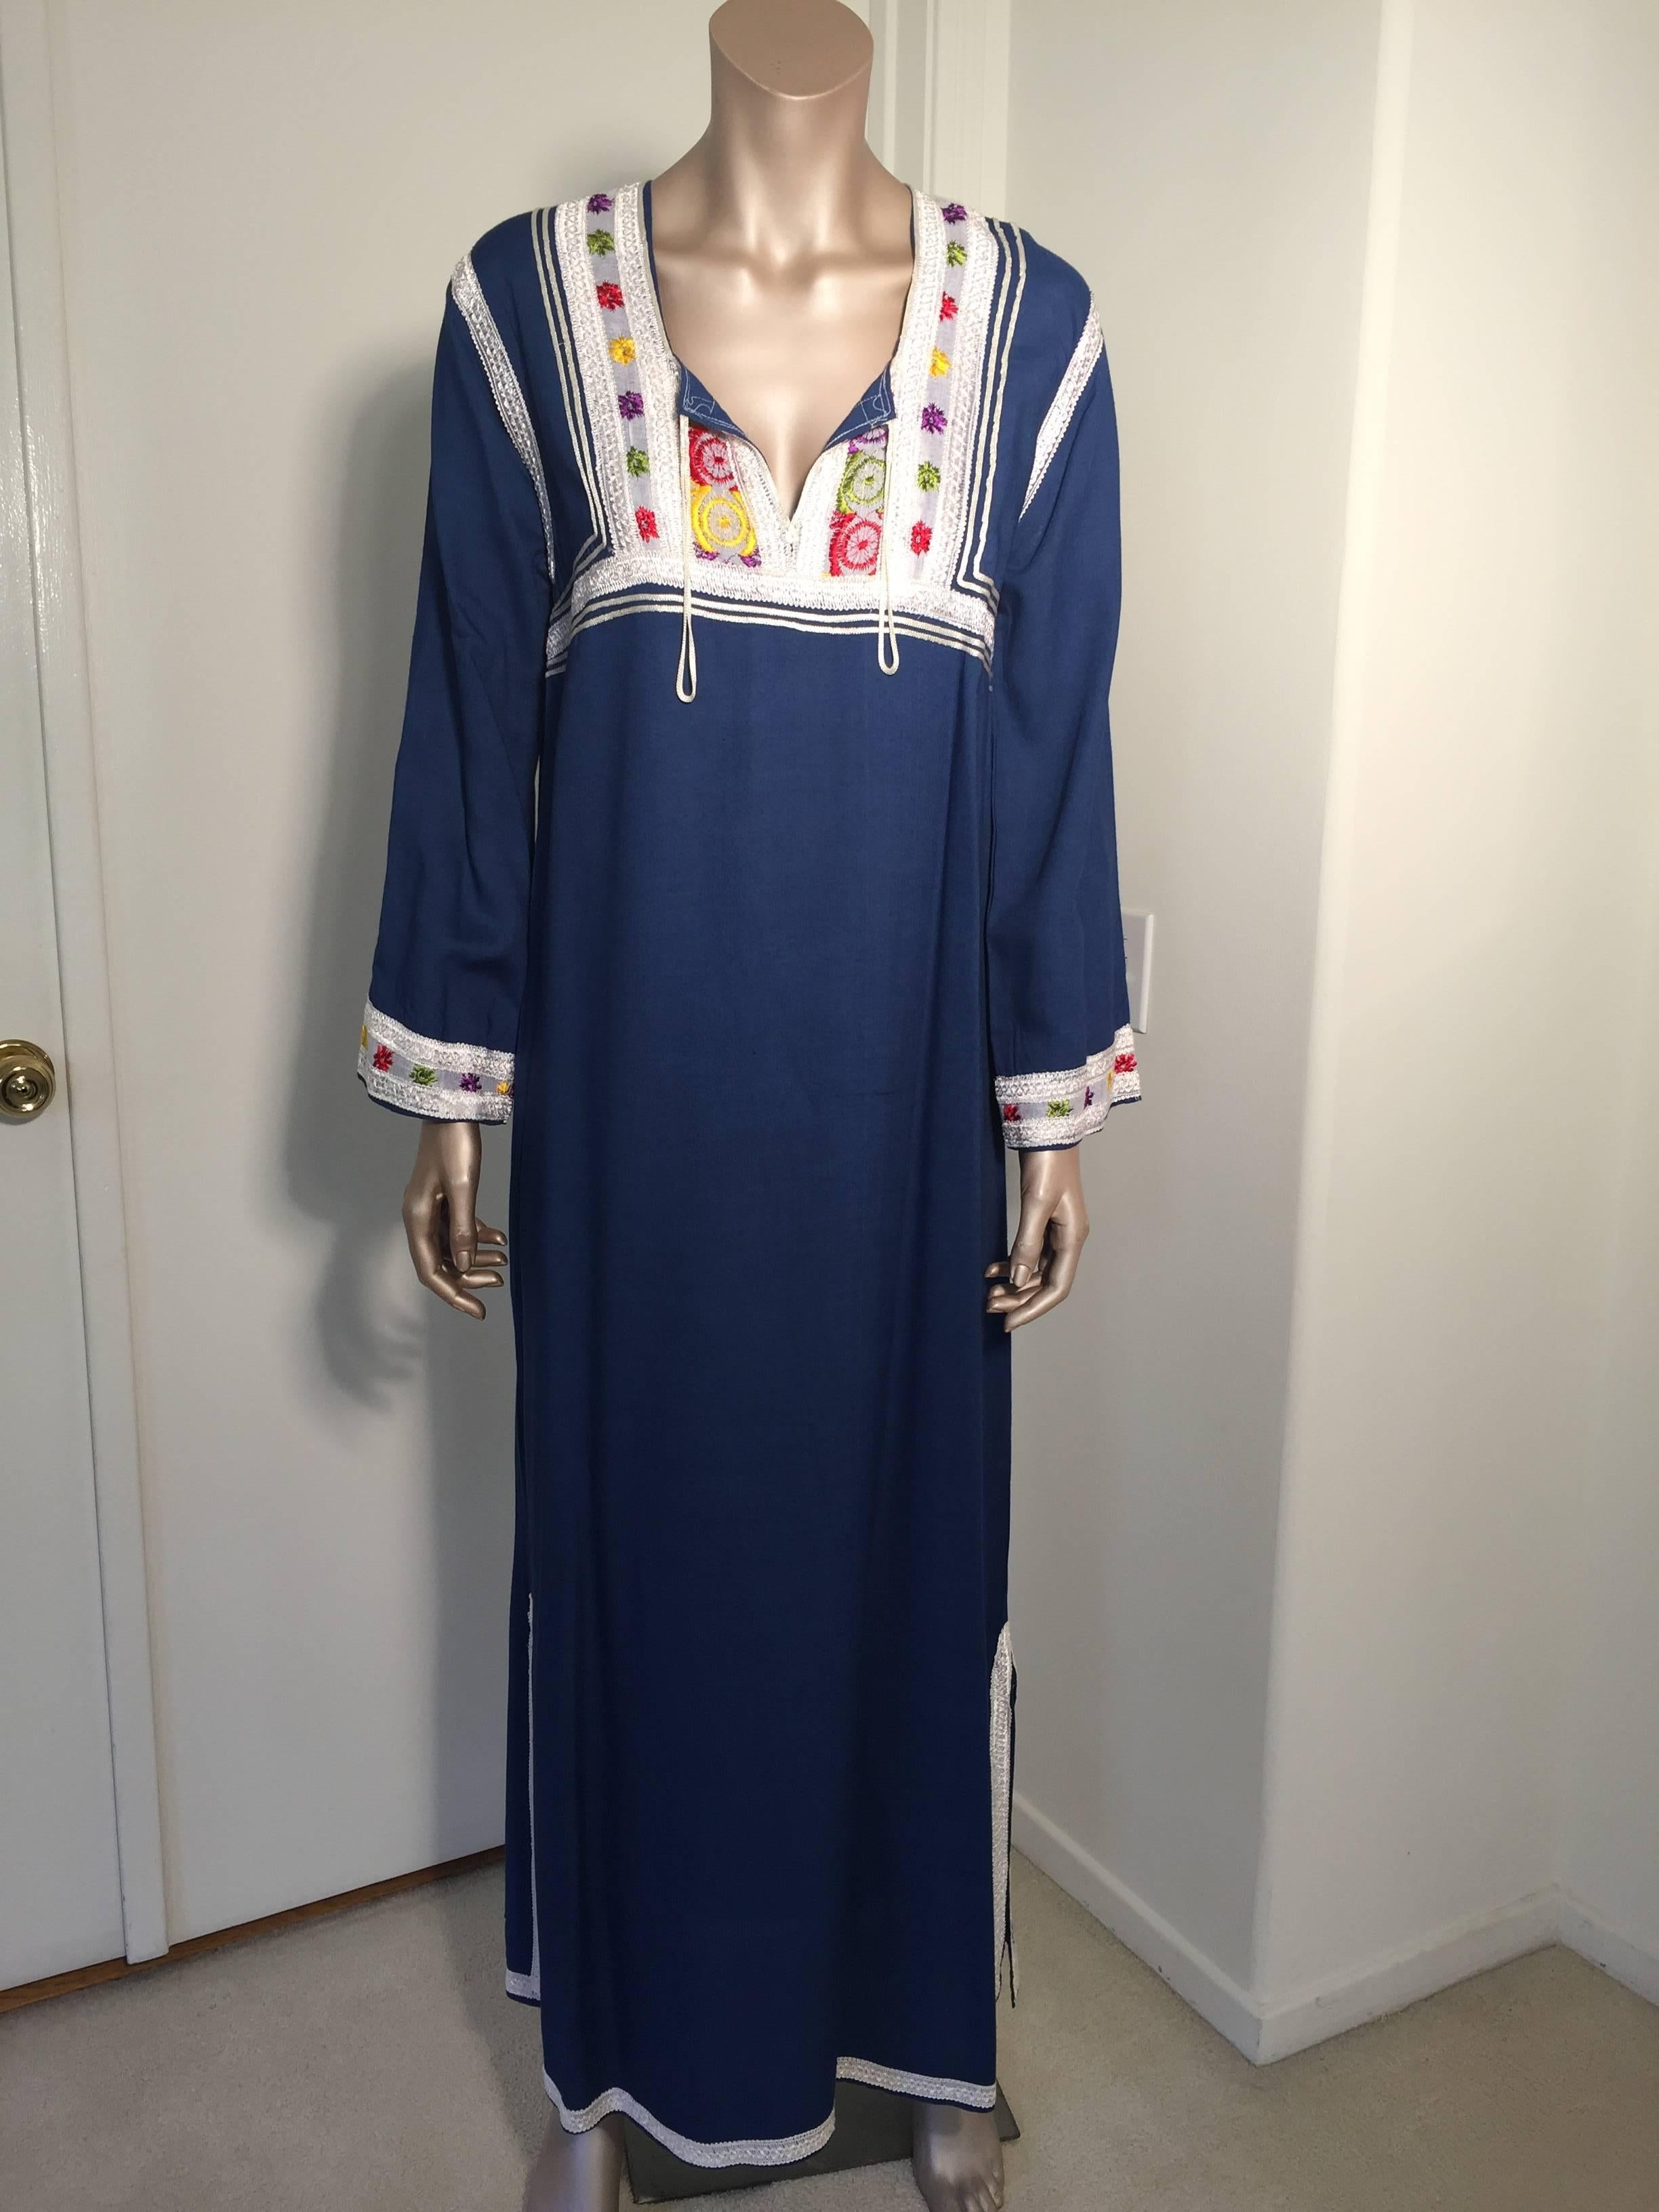 Vintage Moorish Moroccan blue caftan, circa 1970s.
Vintage Moorish Maxi Dress kaftan in Excellent condition never worn.
Made in Morocco and imported for Mr Glenn Mark, Boston.
Blue 75% cotton and 25% Fibrane.
Nice embroidered in white, red yellow